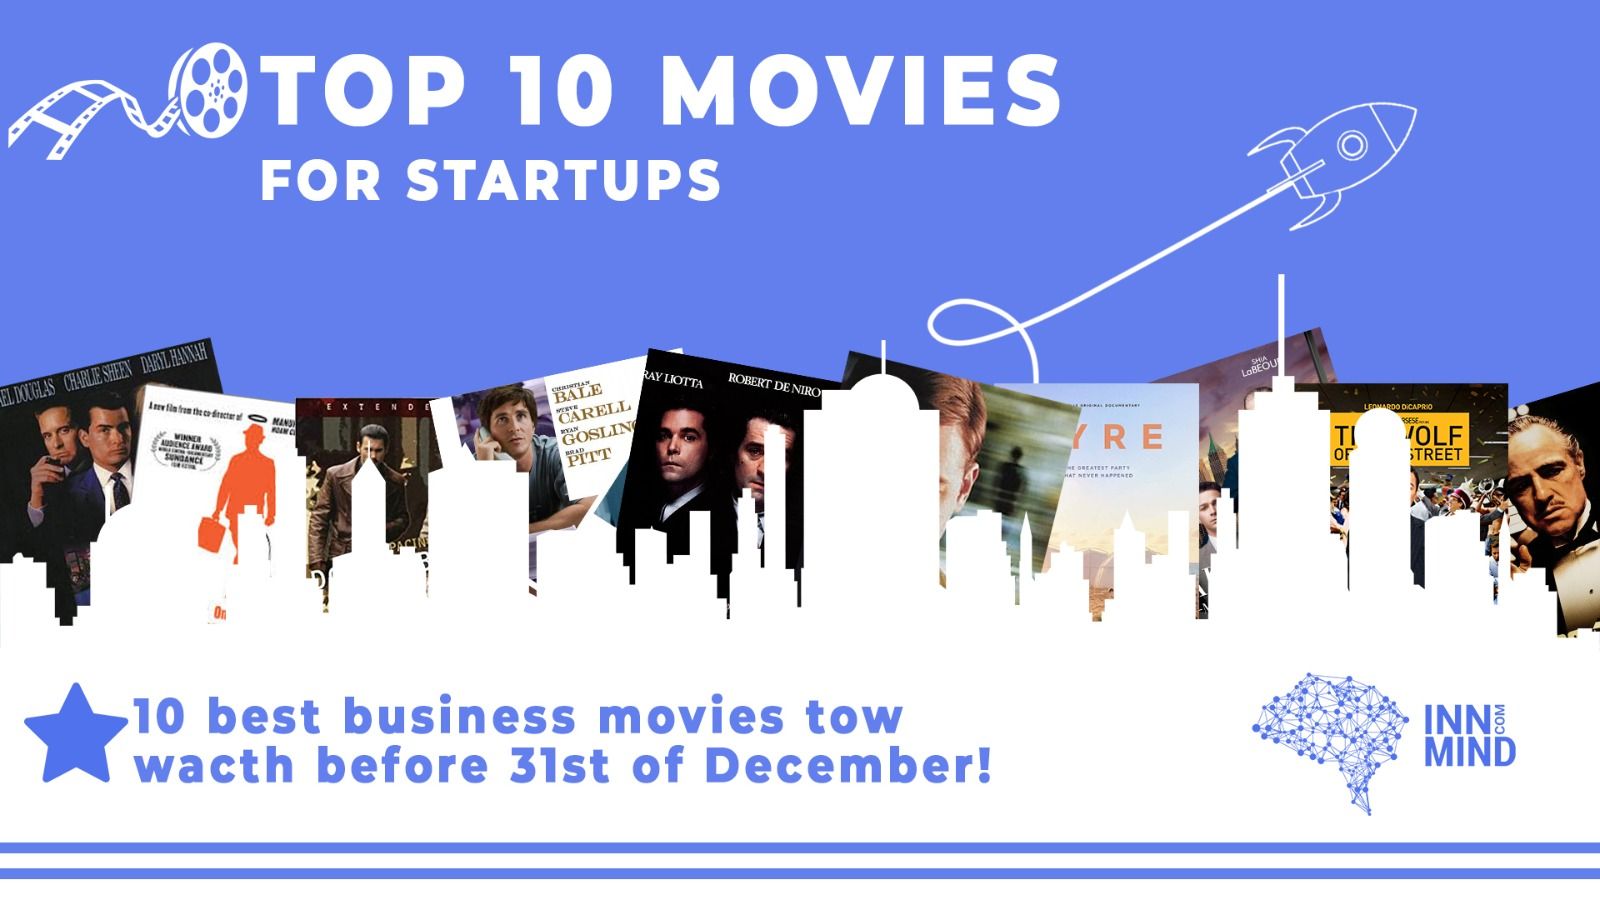 Top 10 movies for startups to watch in 2021